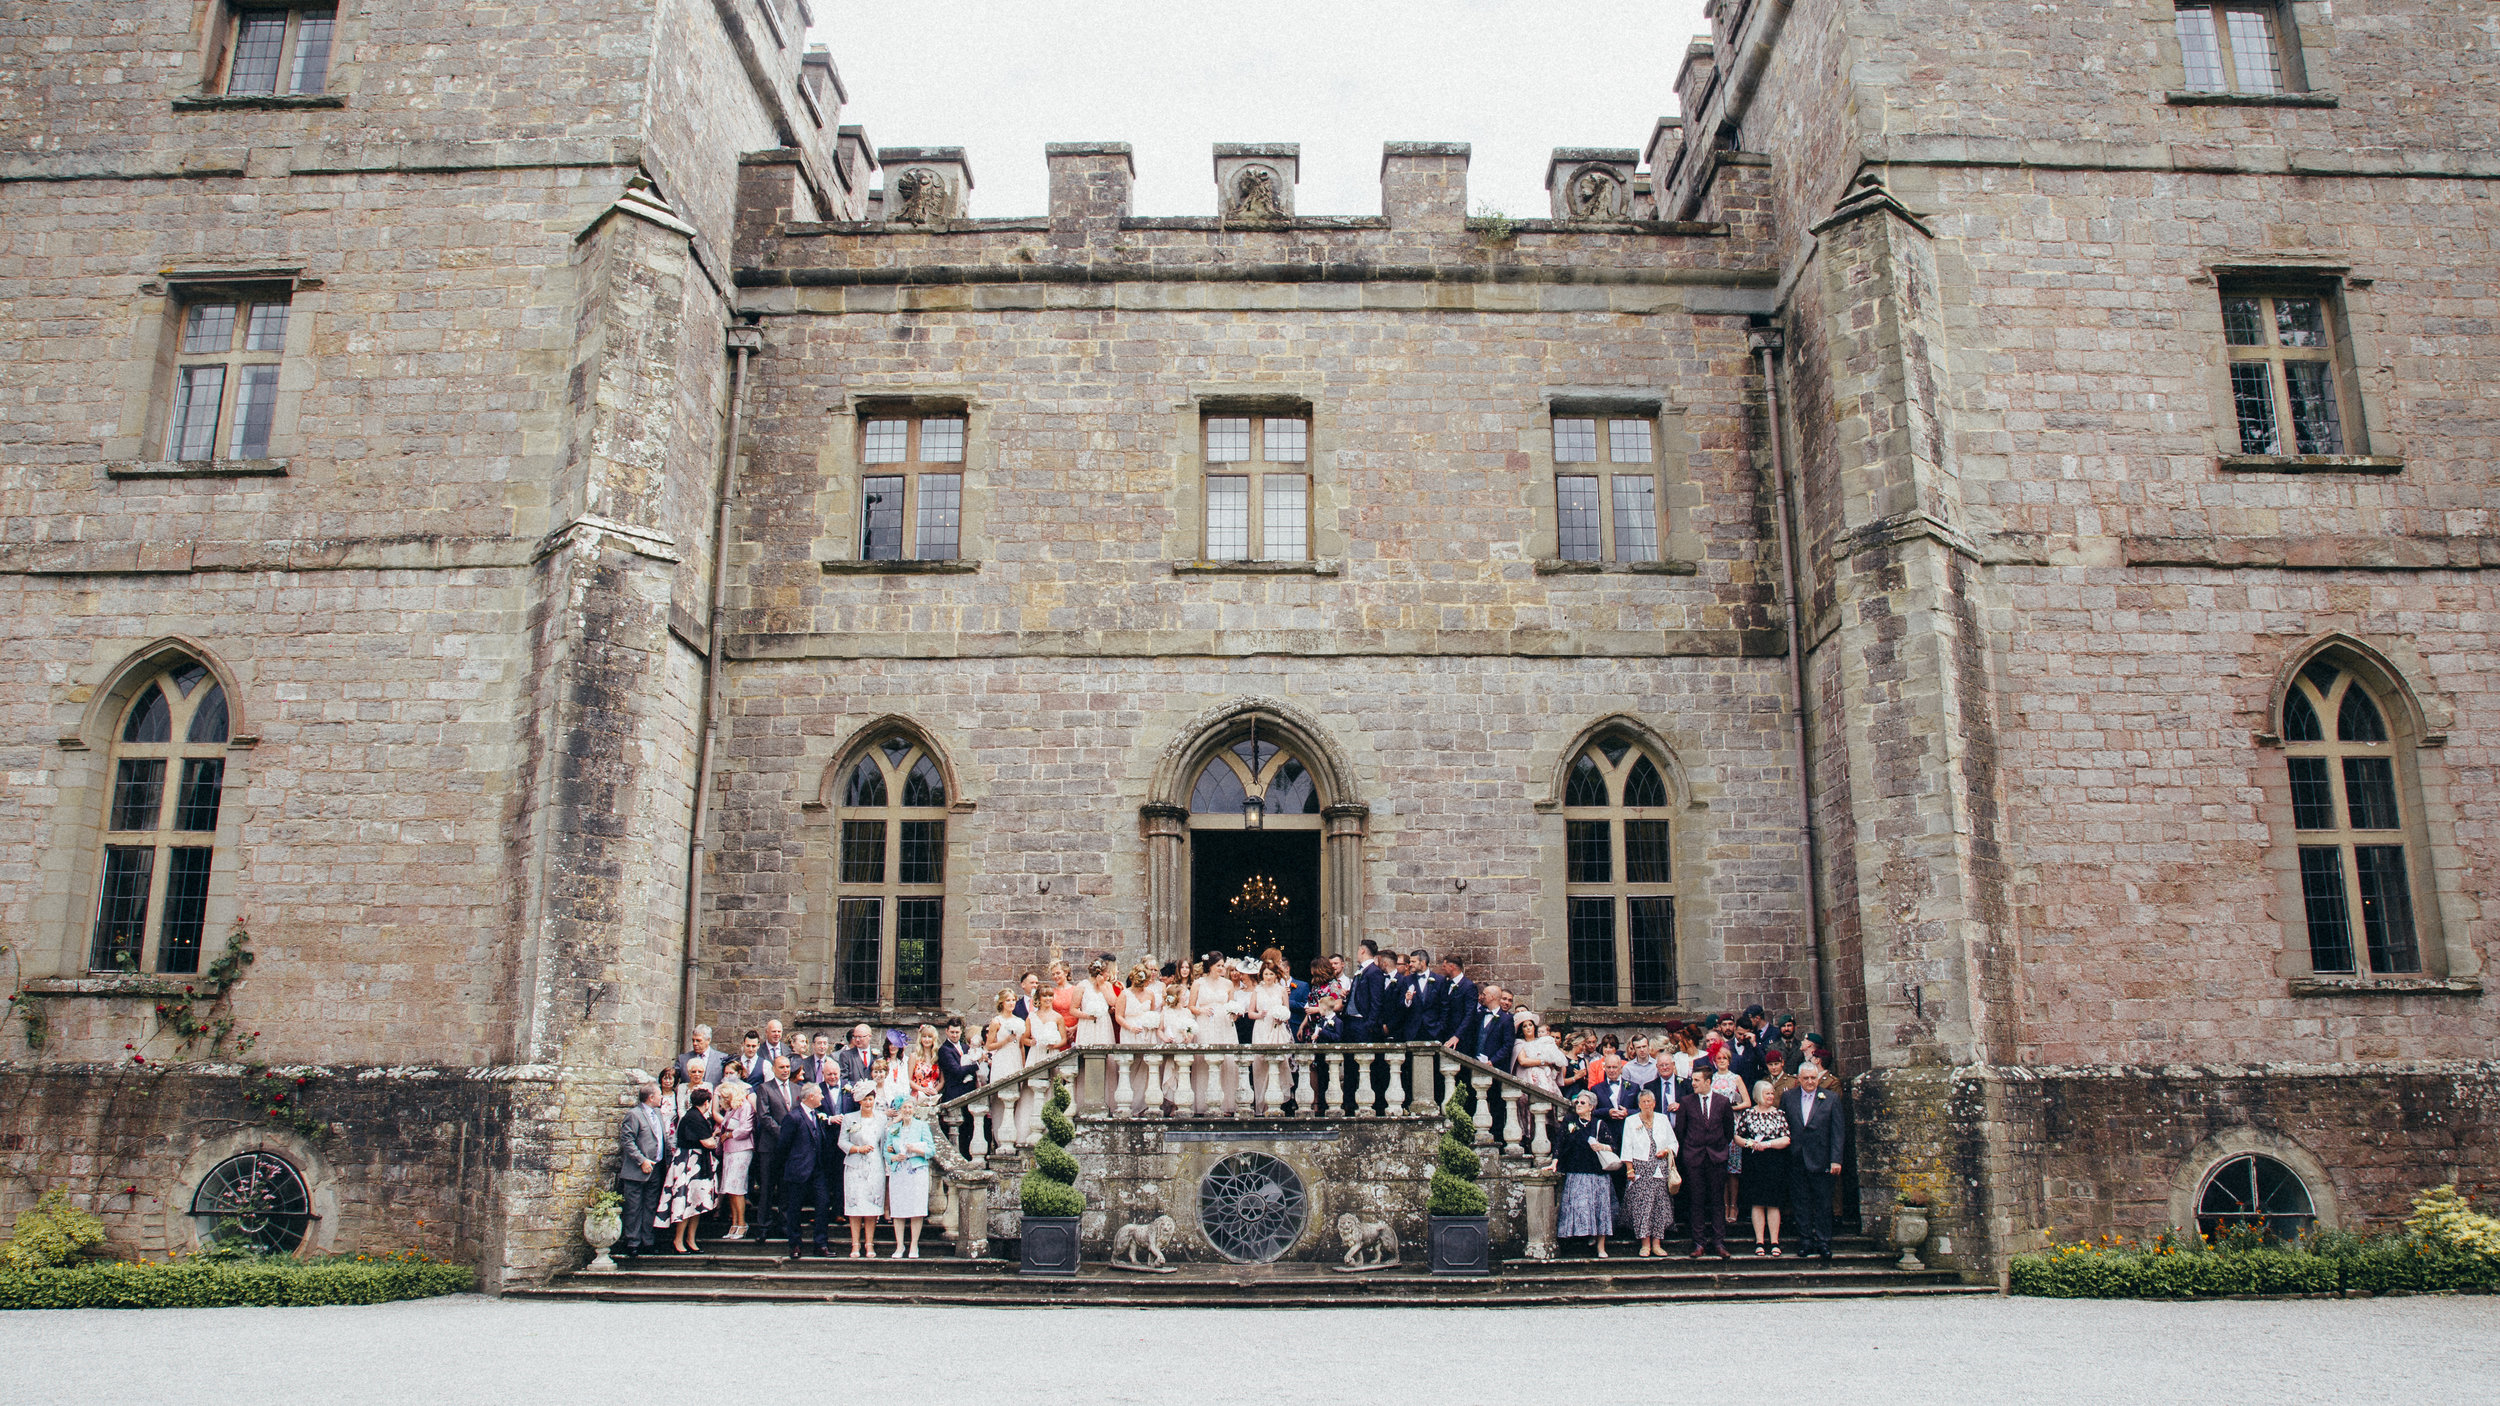 Clearwell Castle group photoshoot